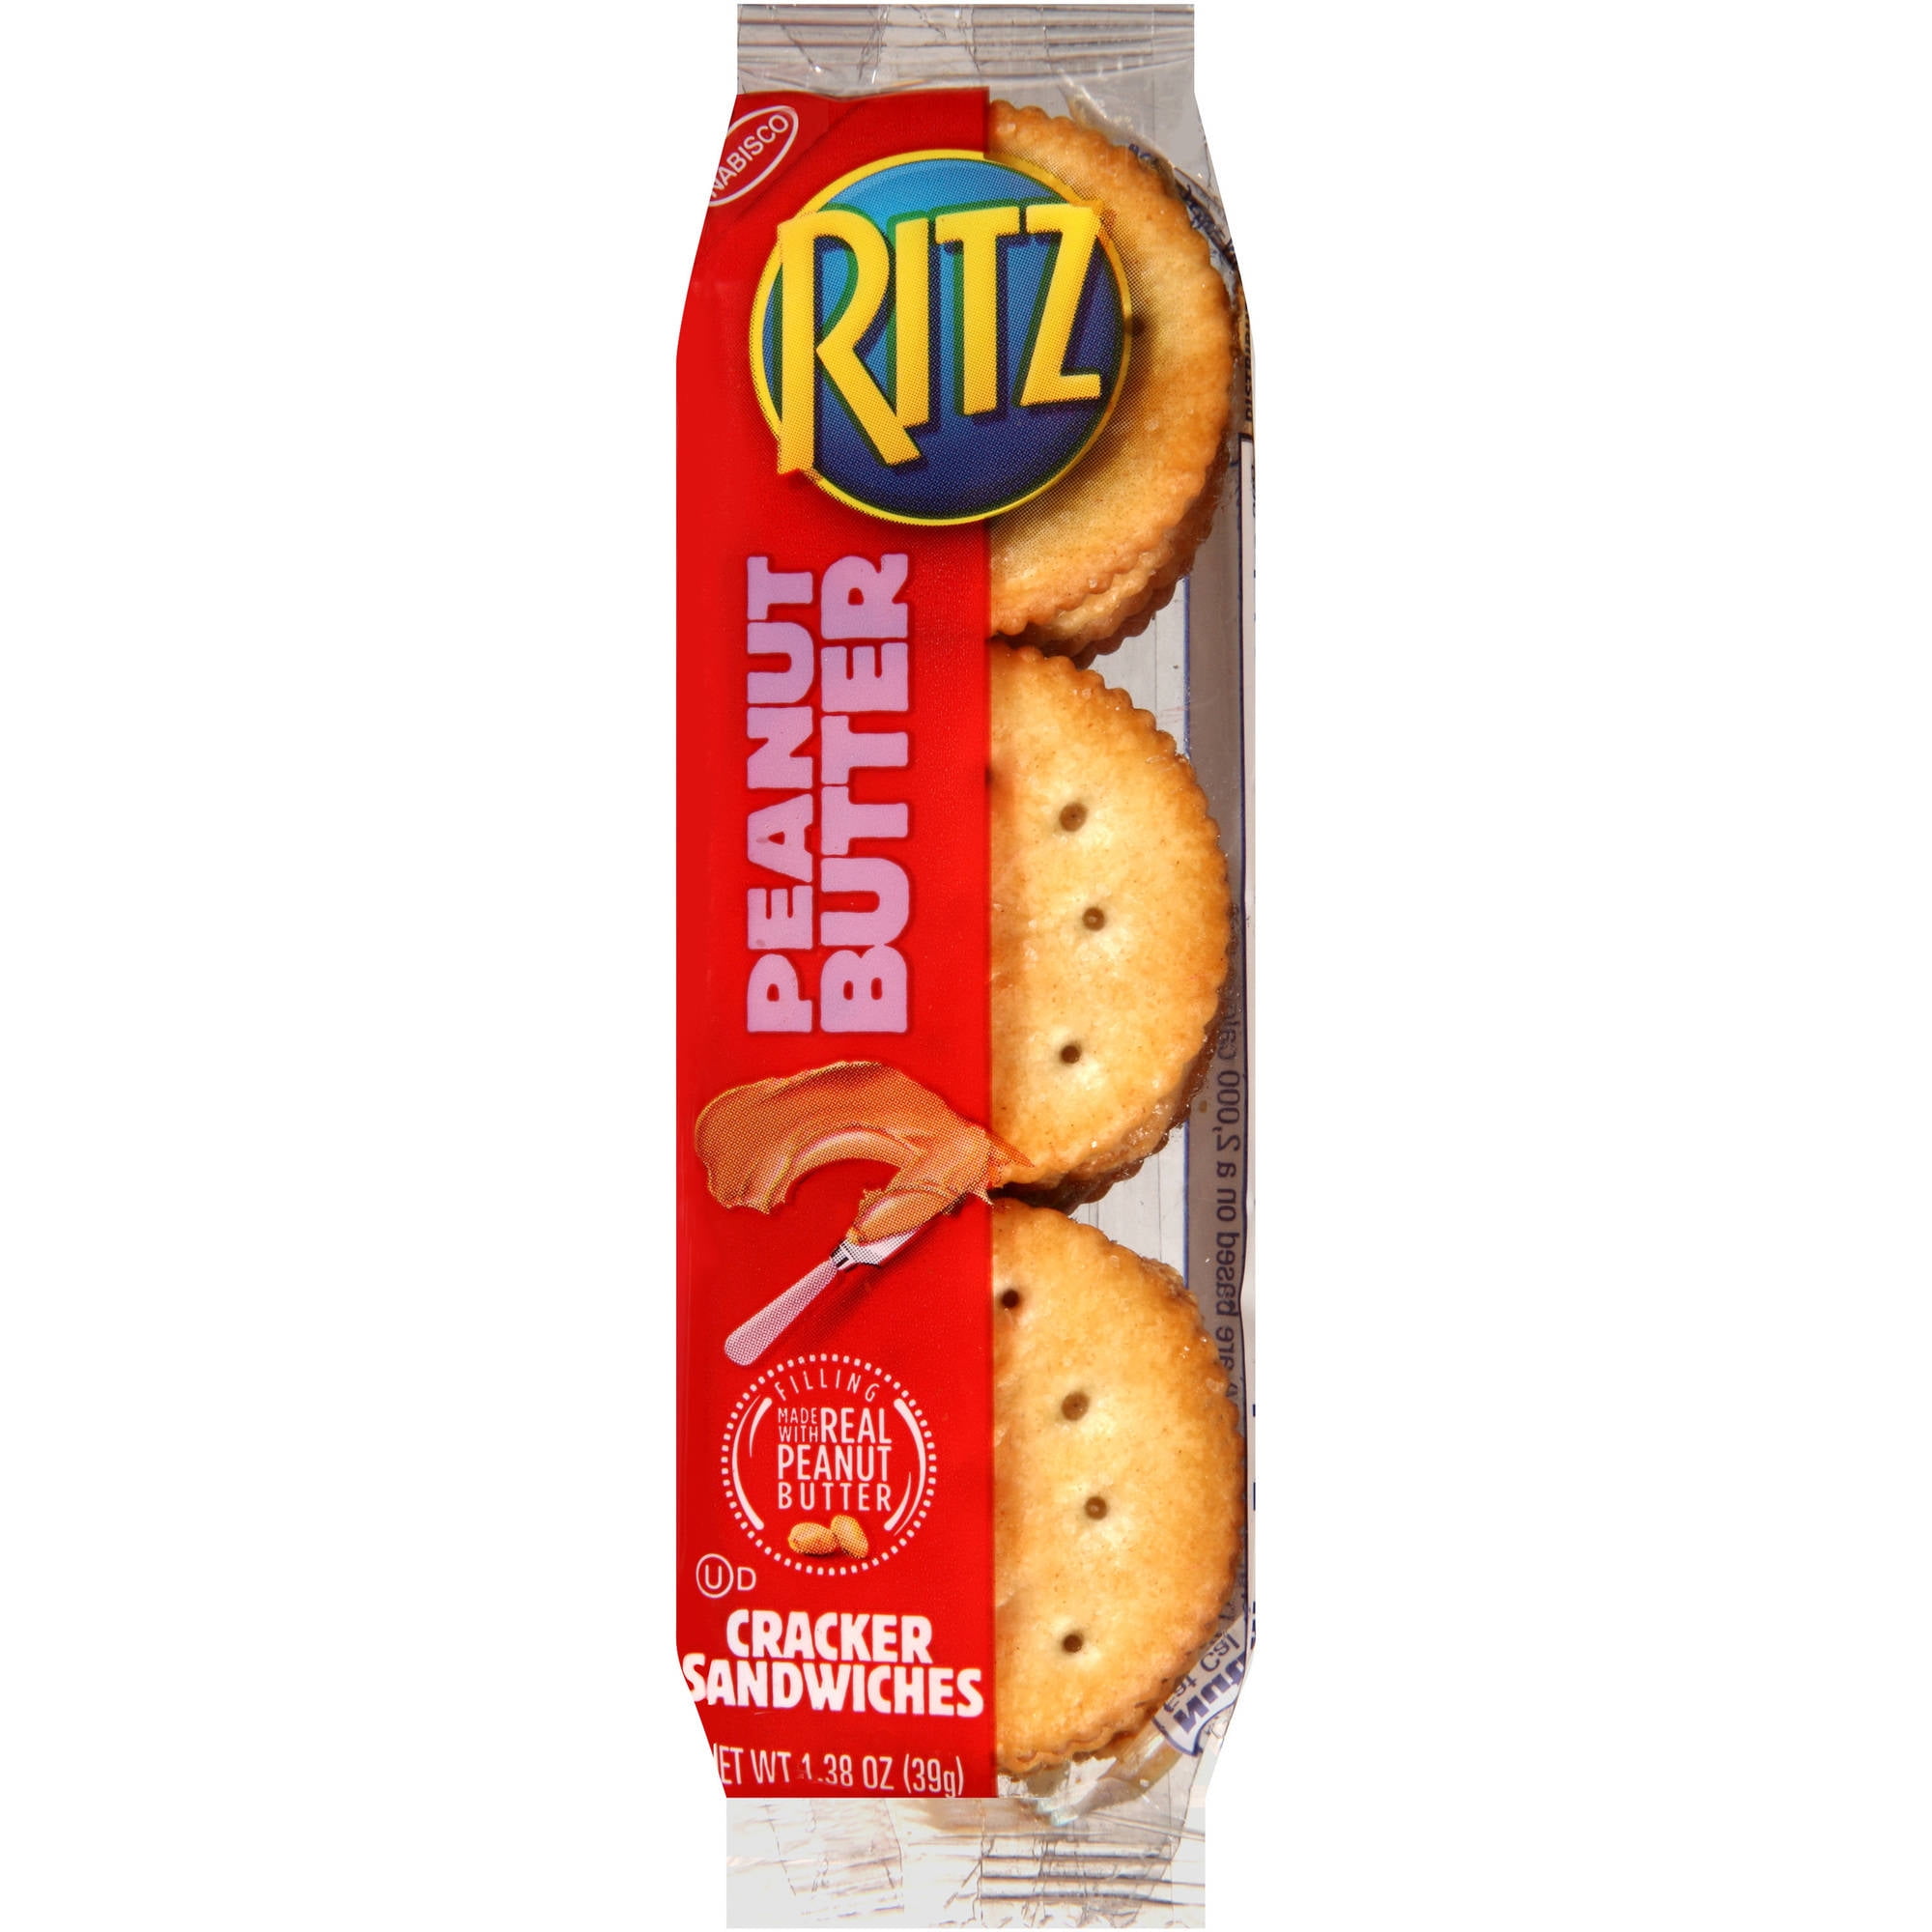 are ritz crackers with peanut butter healthy